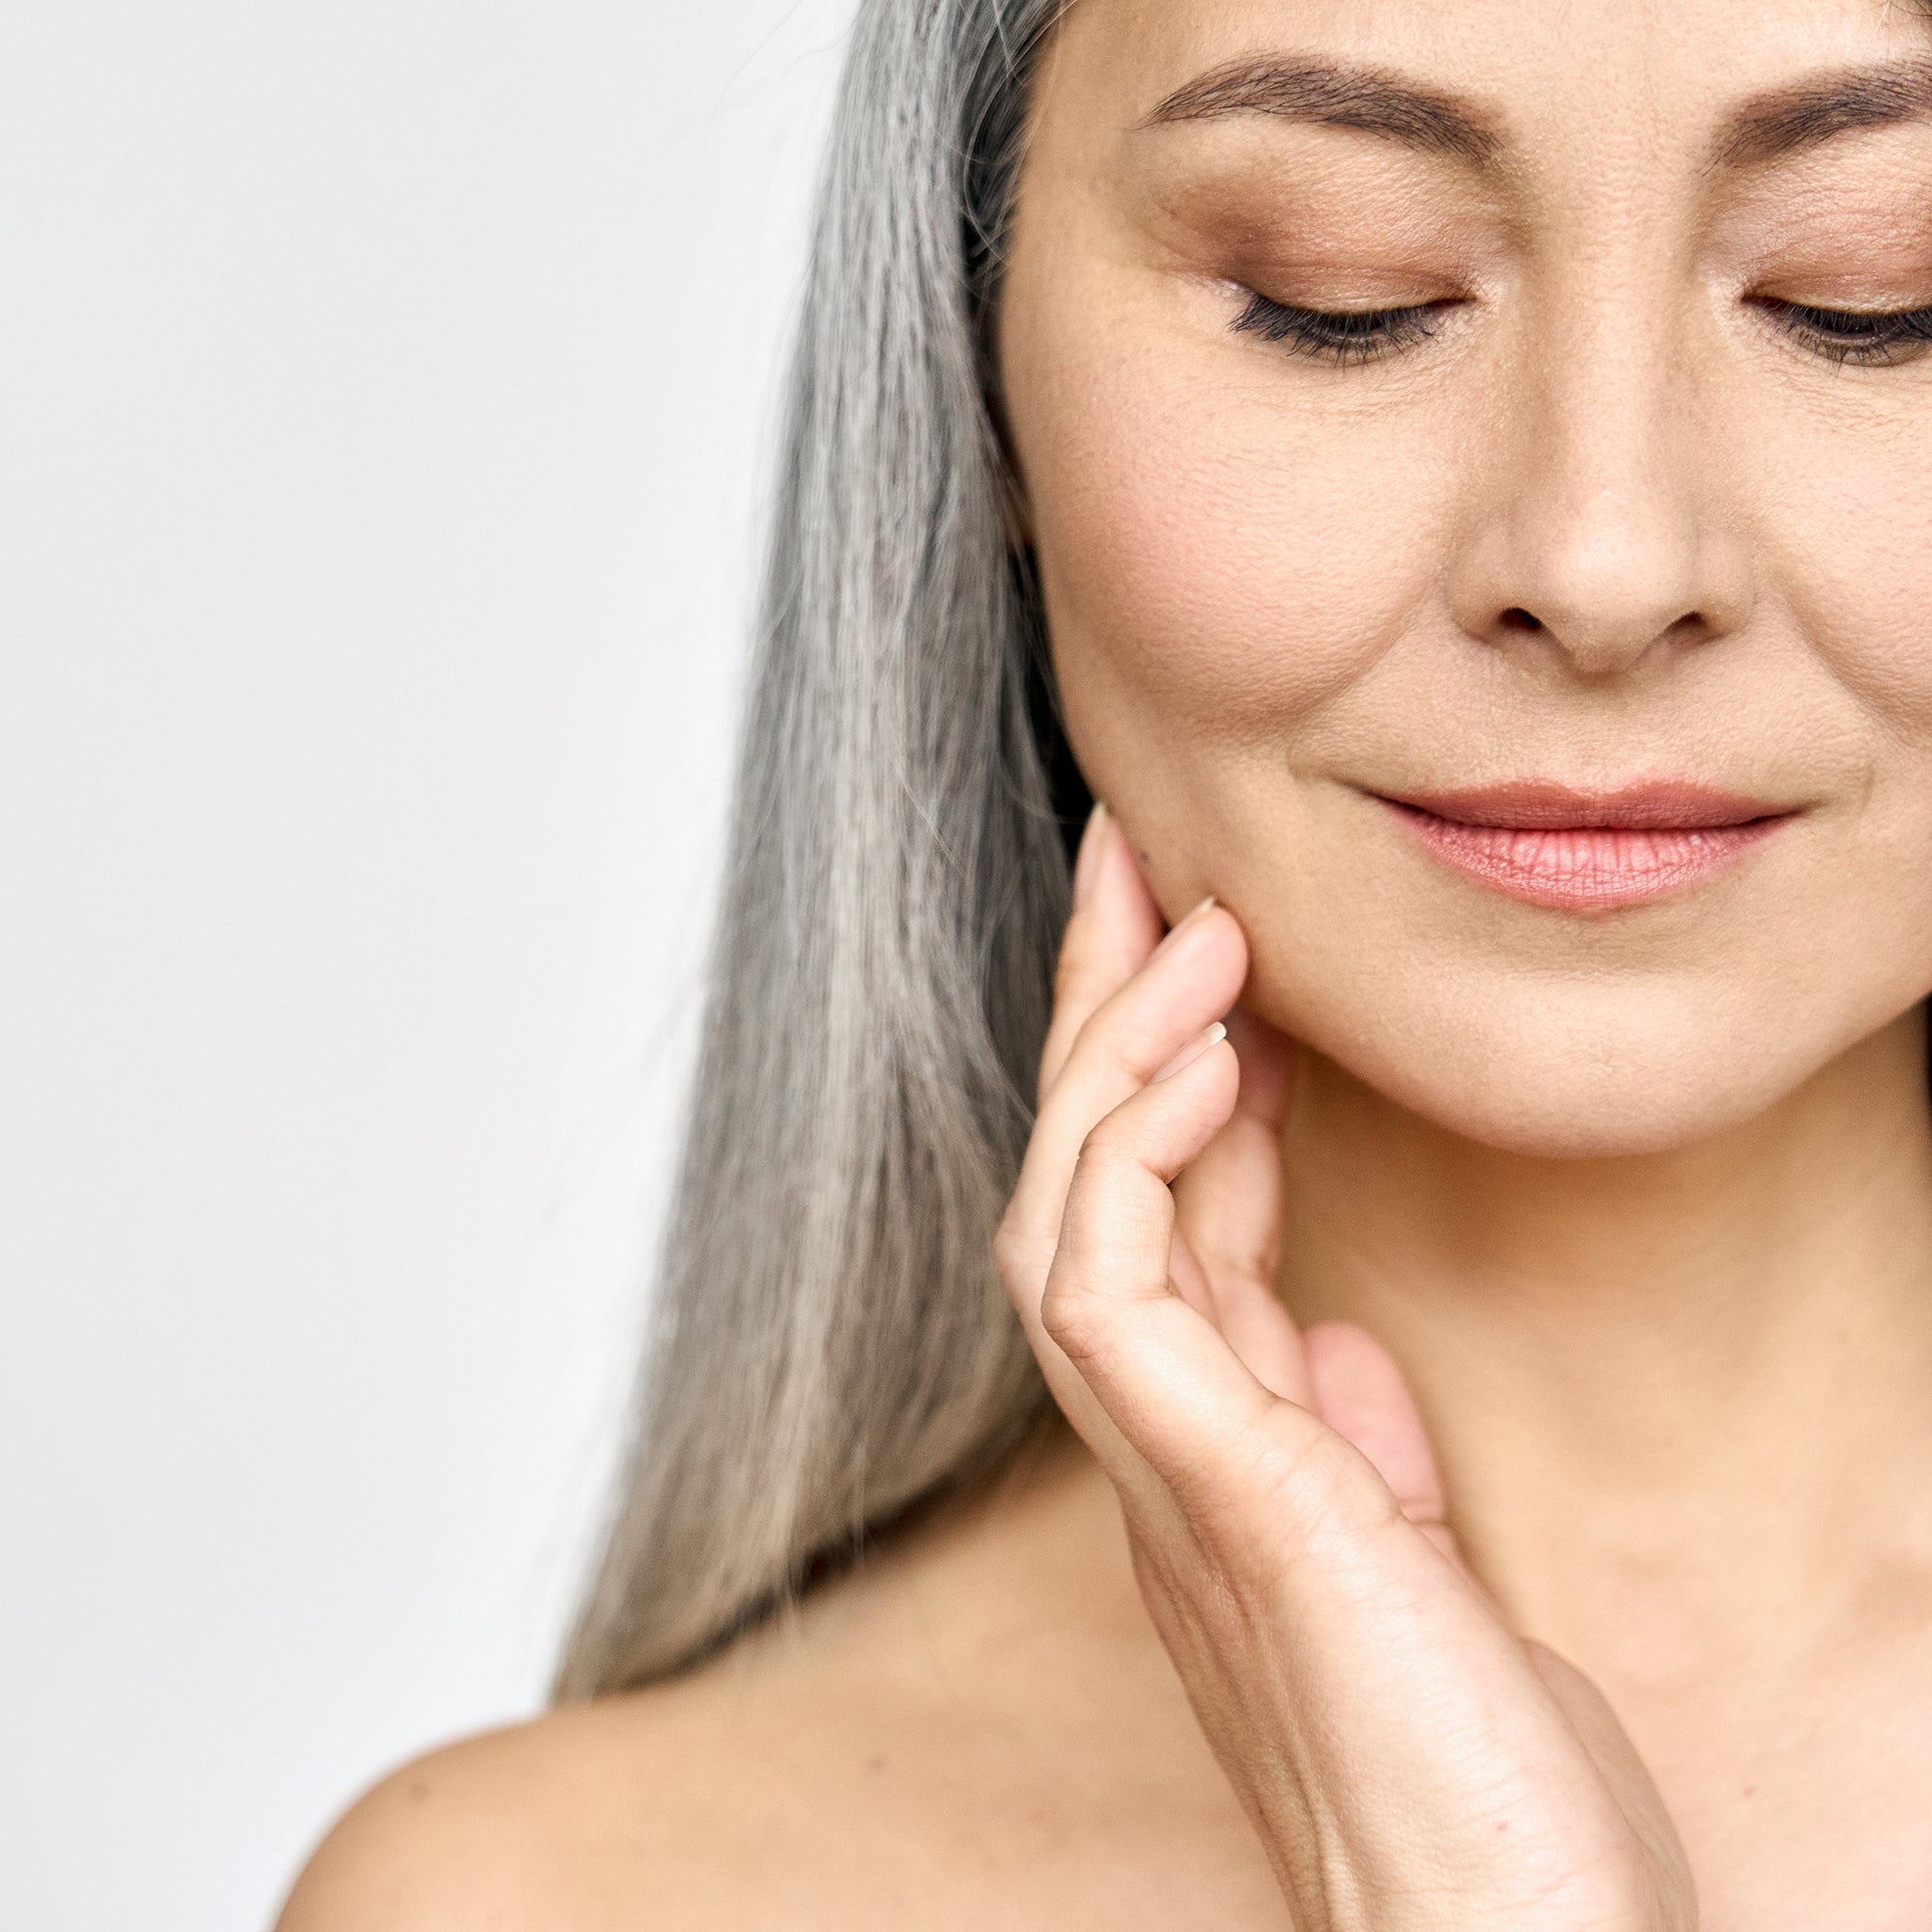 estrogen skincare, woman with gray hair touching her face